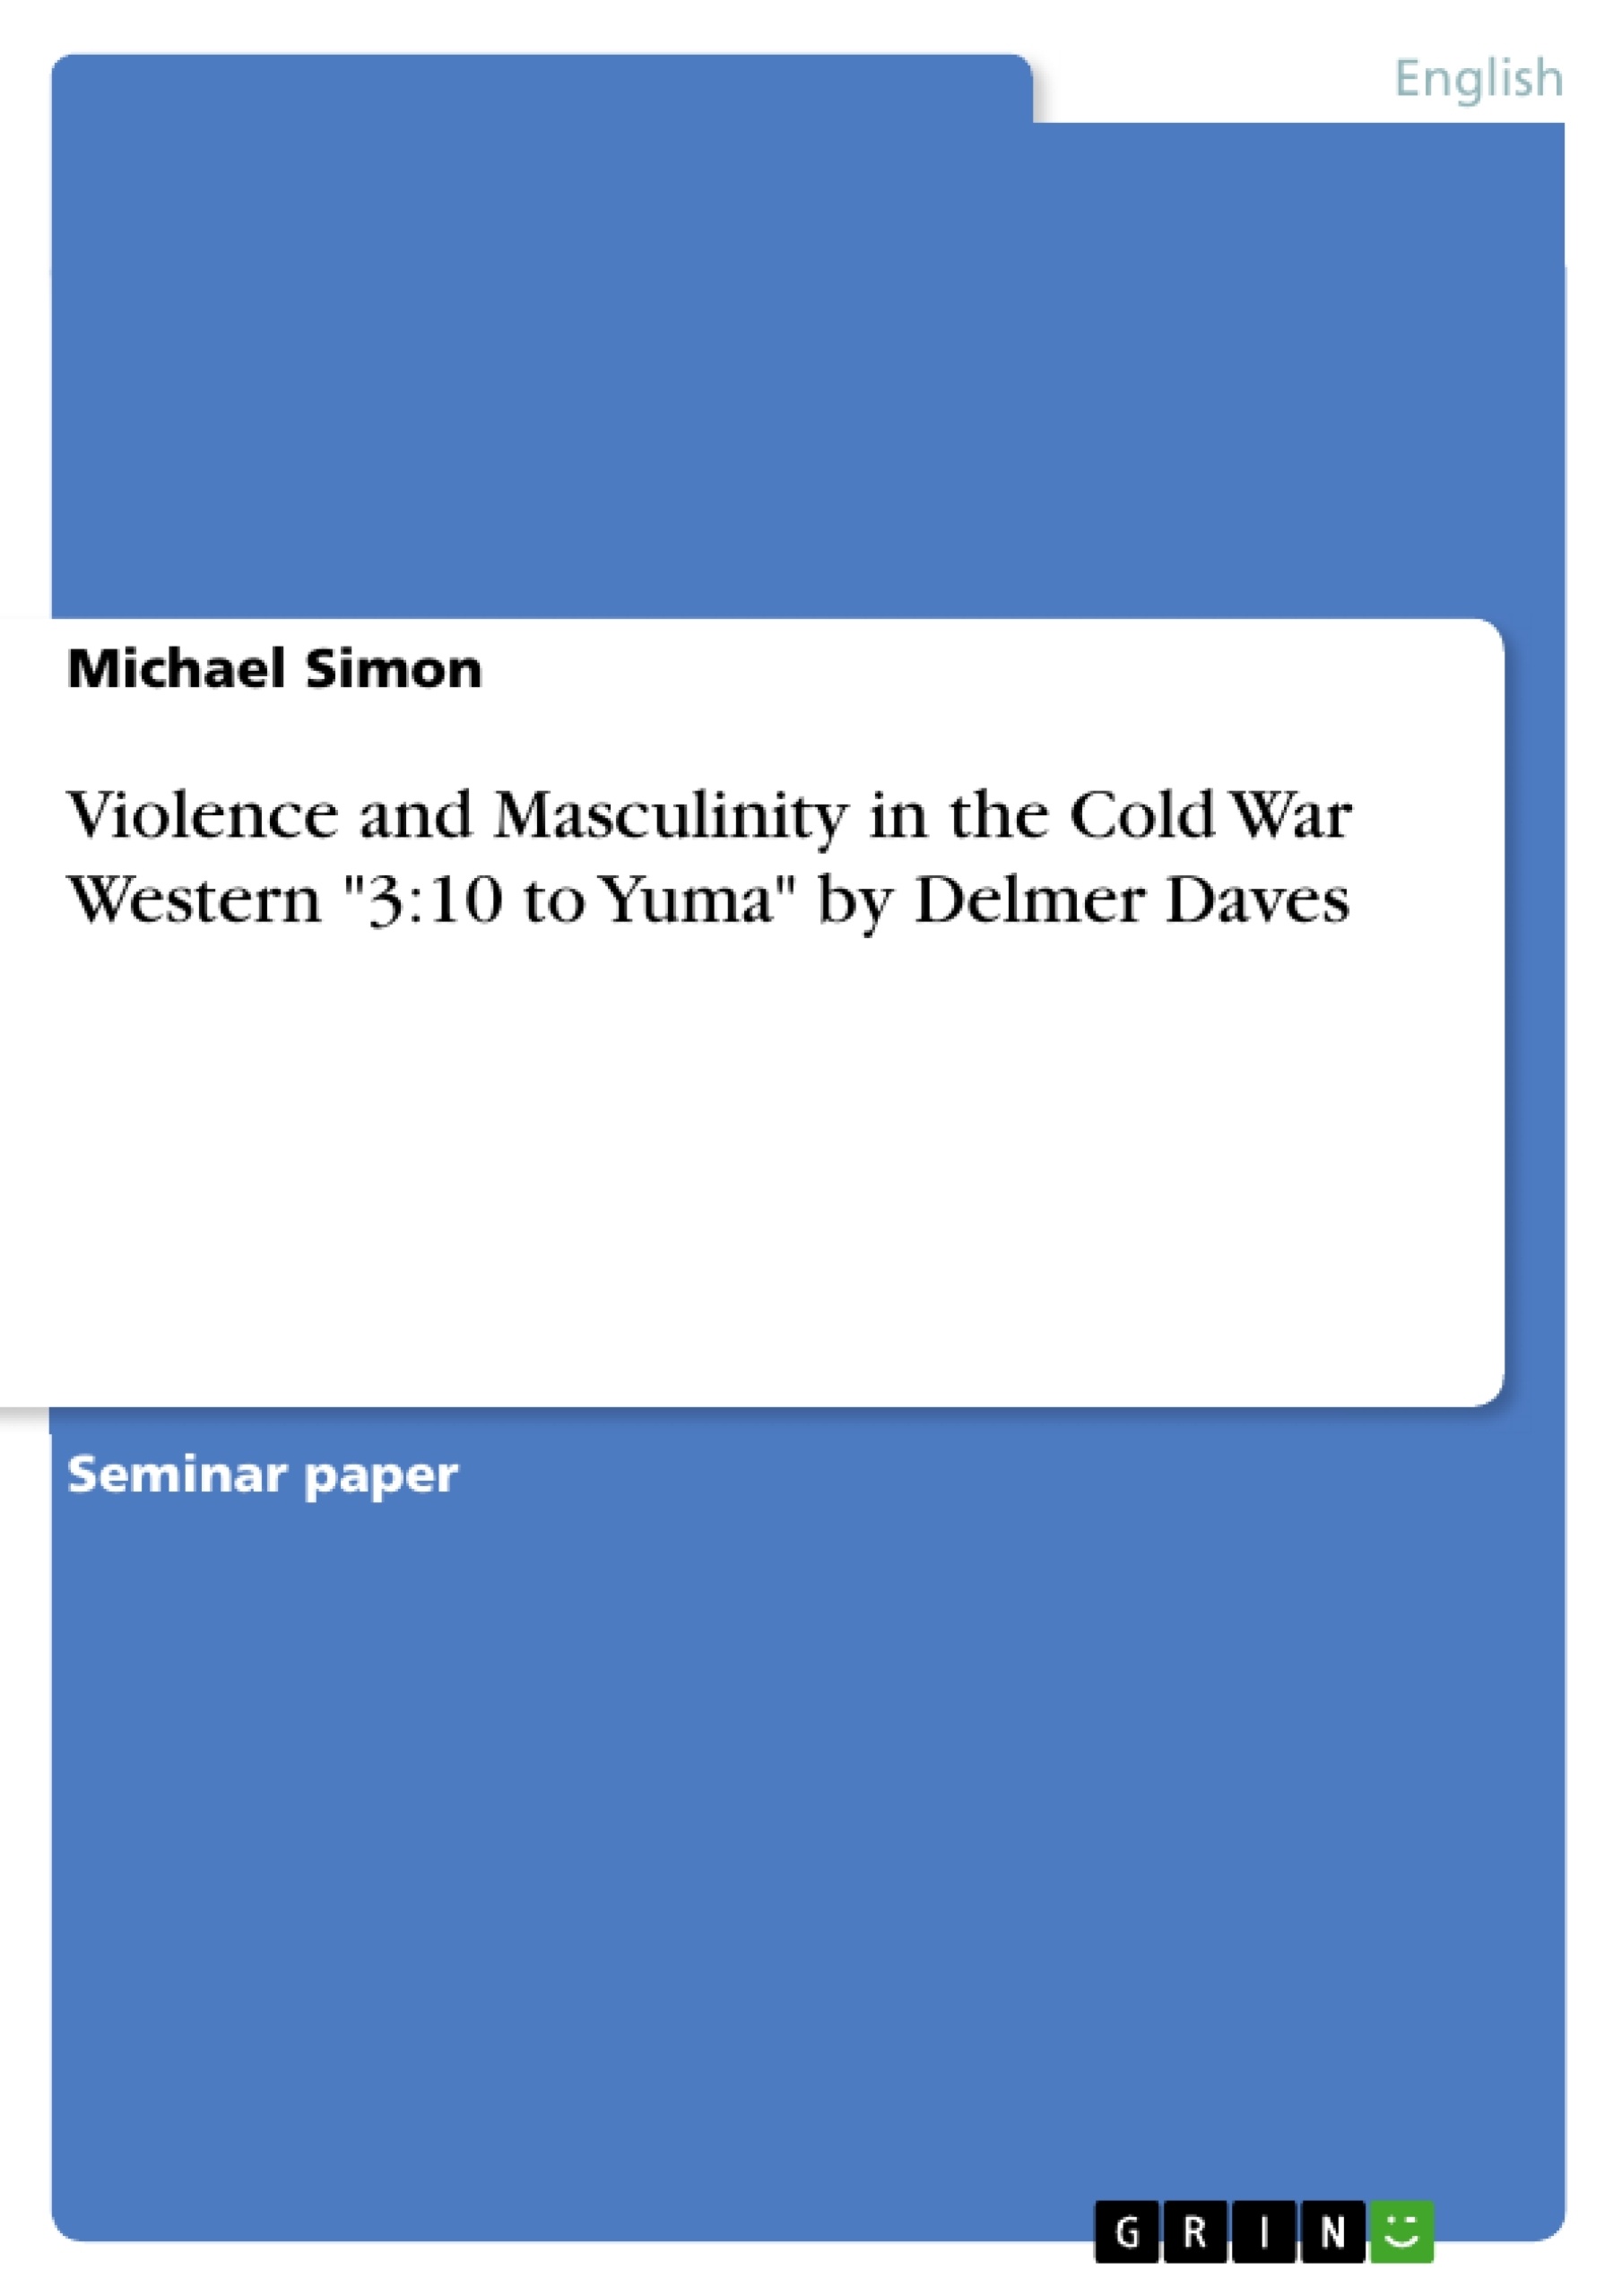 Title: Violence and Masculinity in the Cold War Western "3:10 to Yuma" by Delmer Daves